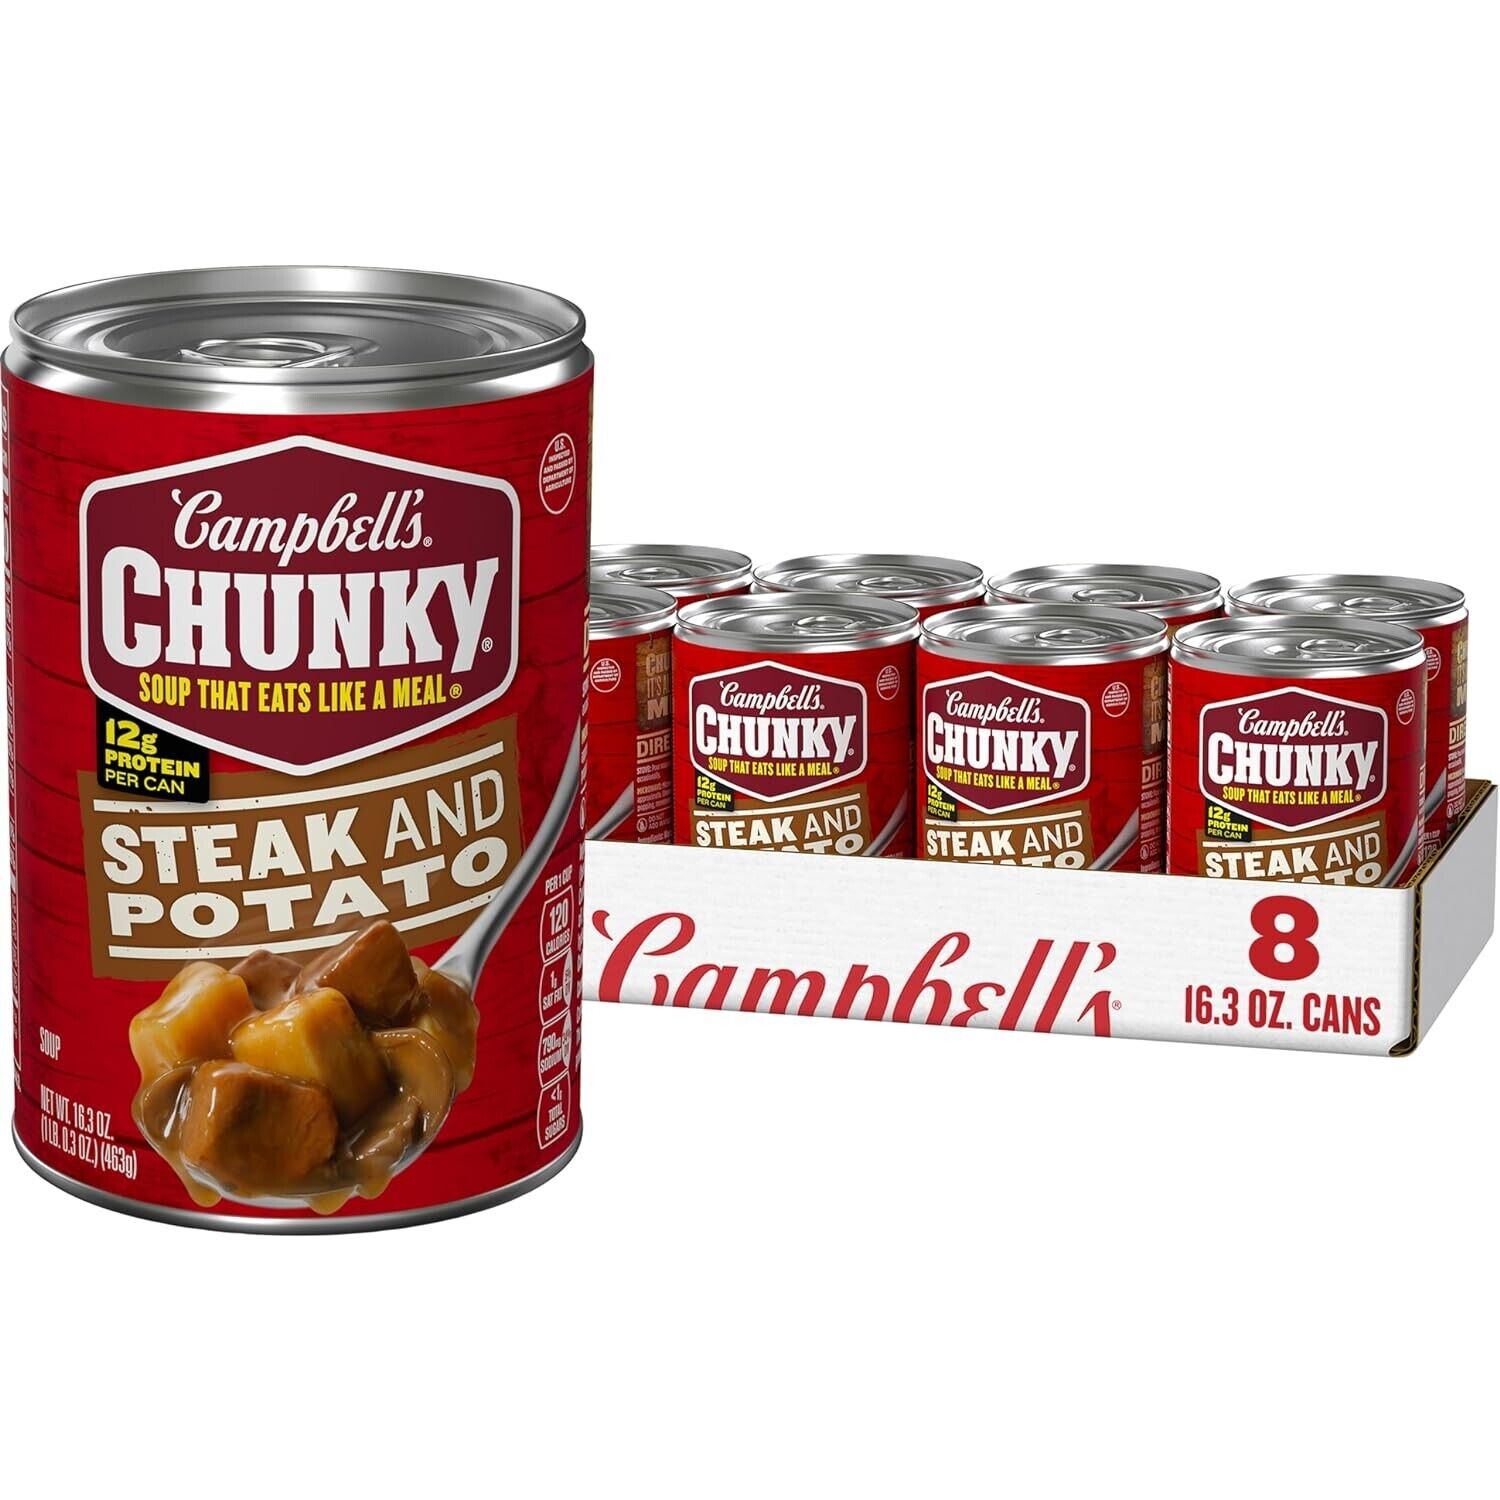 Campbell’s Chunky Soup, Steak and Potato Soup, 16.3 oz Can (Case of 8)